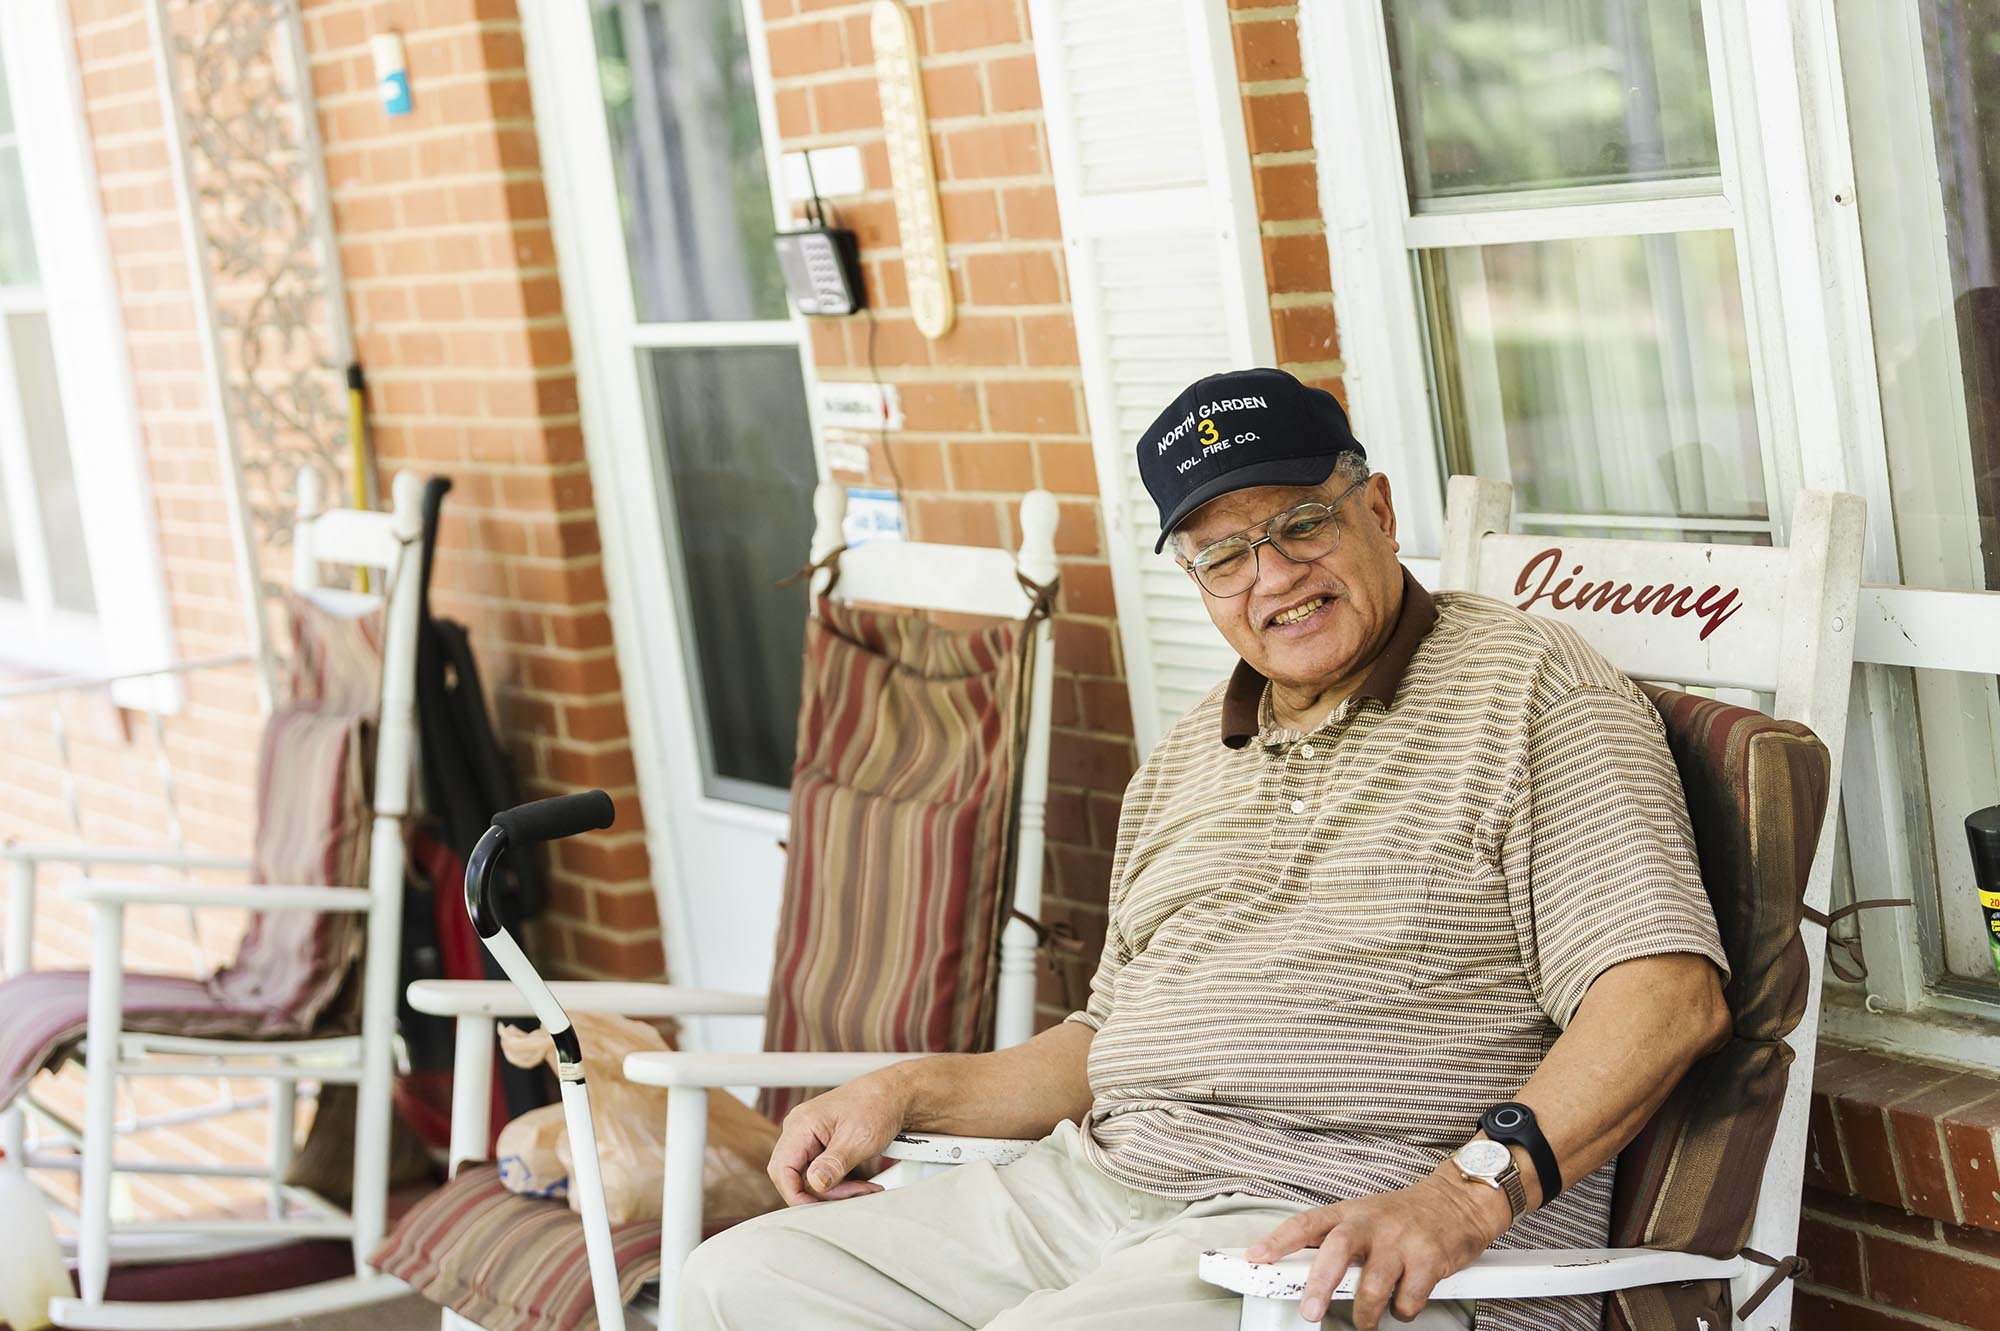 Man sitting in a rocking chair on a porch